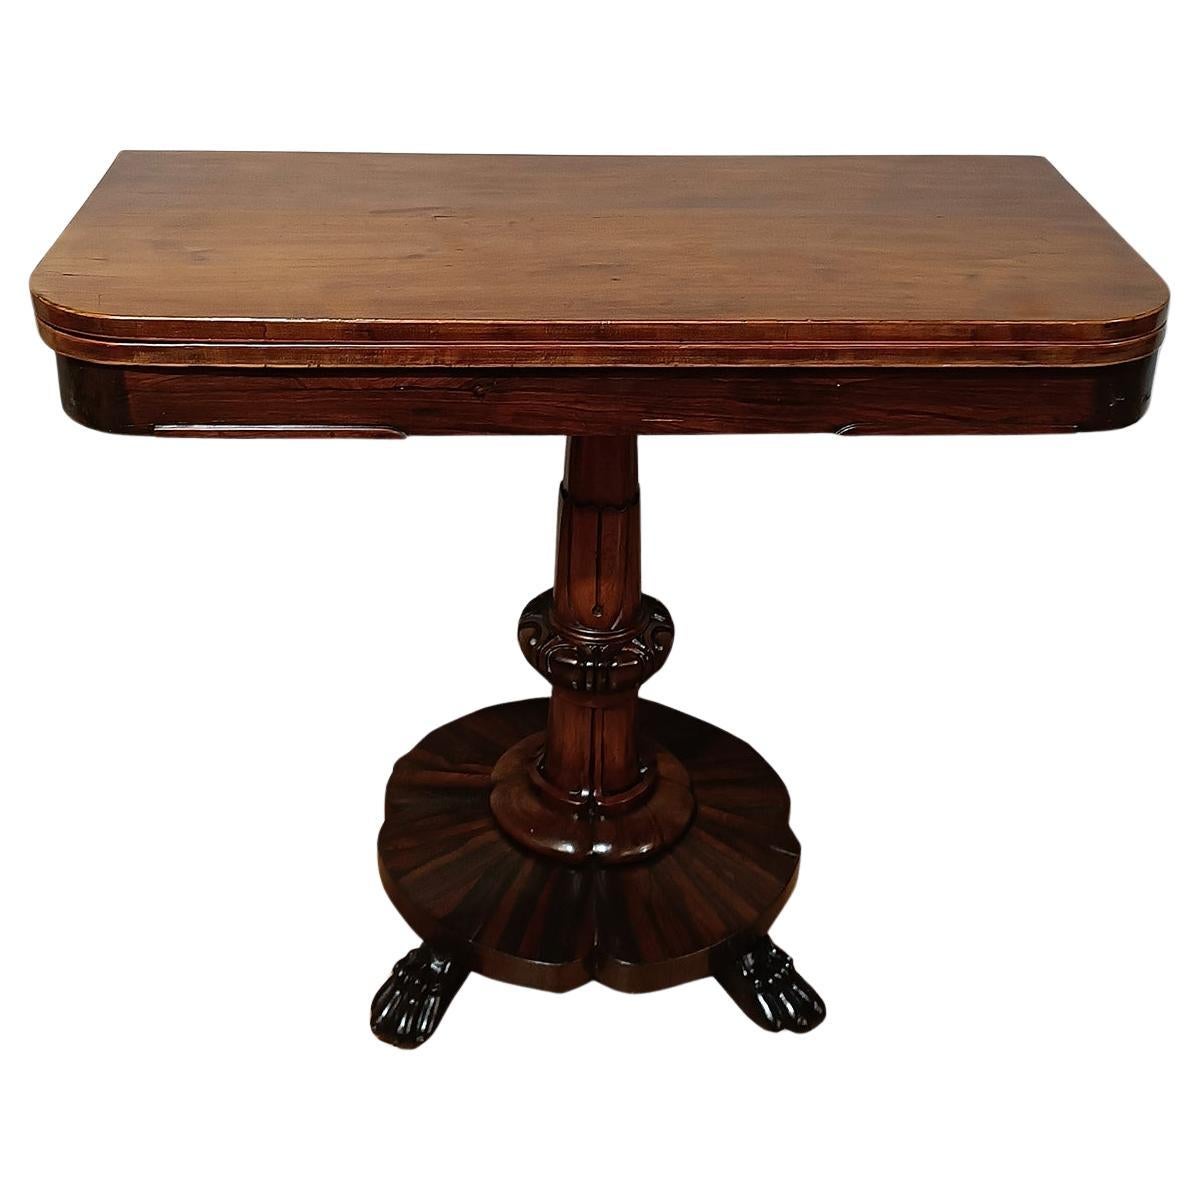 19th CENTURY GAME TABLE